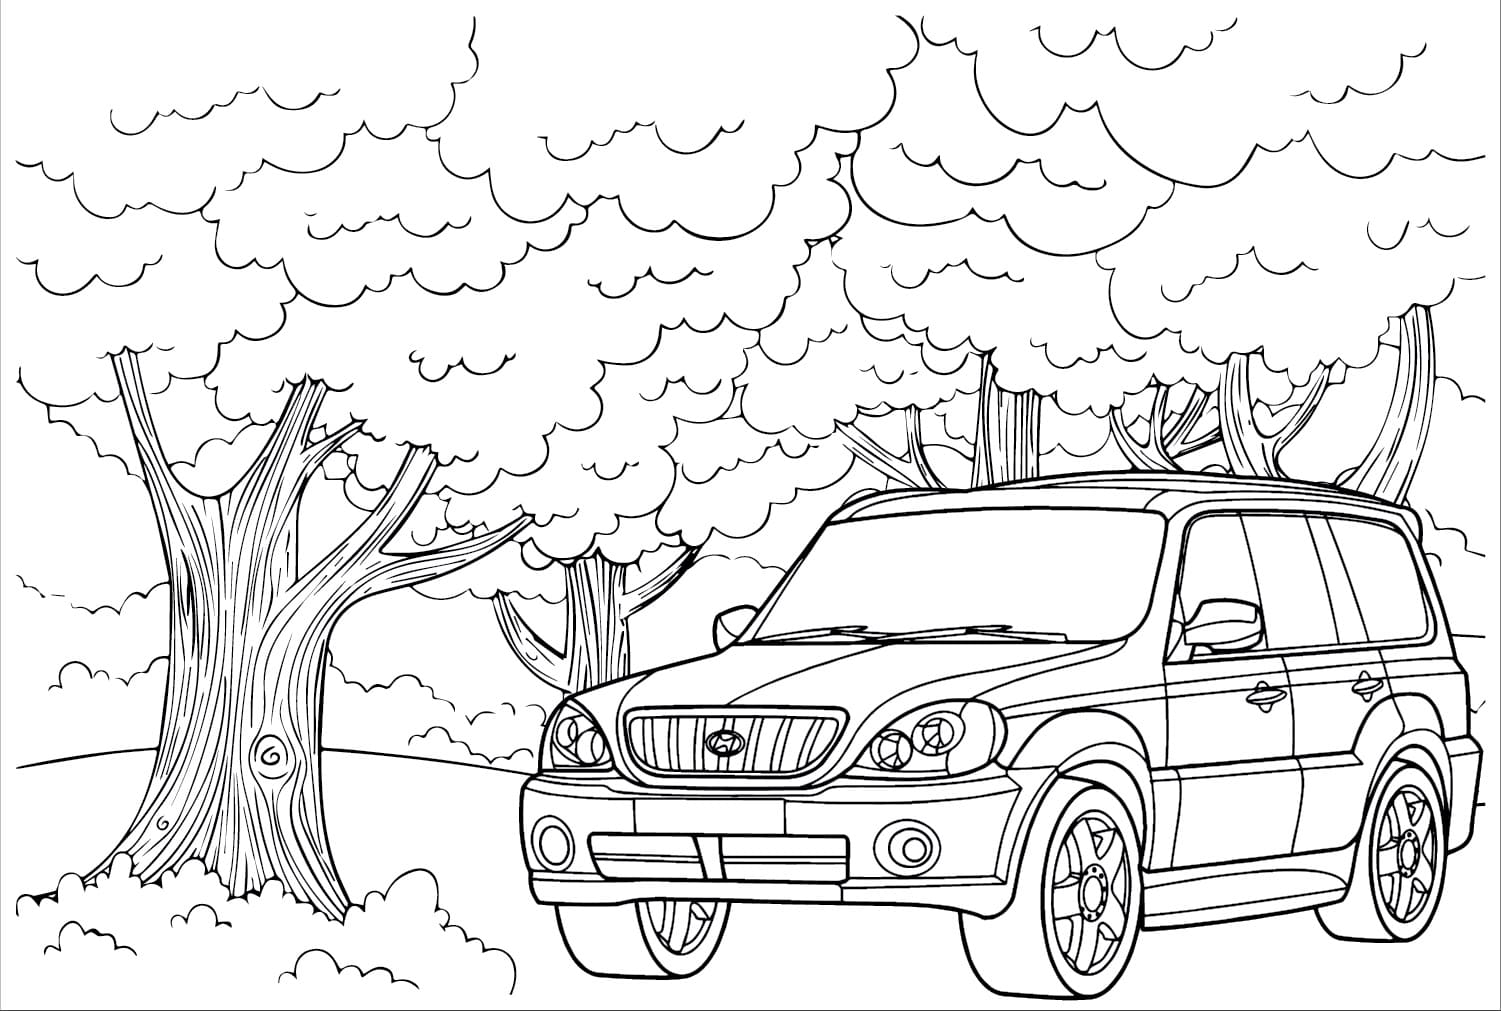 Hyundai Car in the Jungle coloring page - Download, Print or Color ...